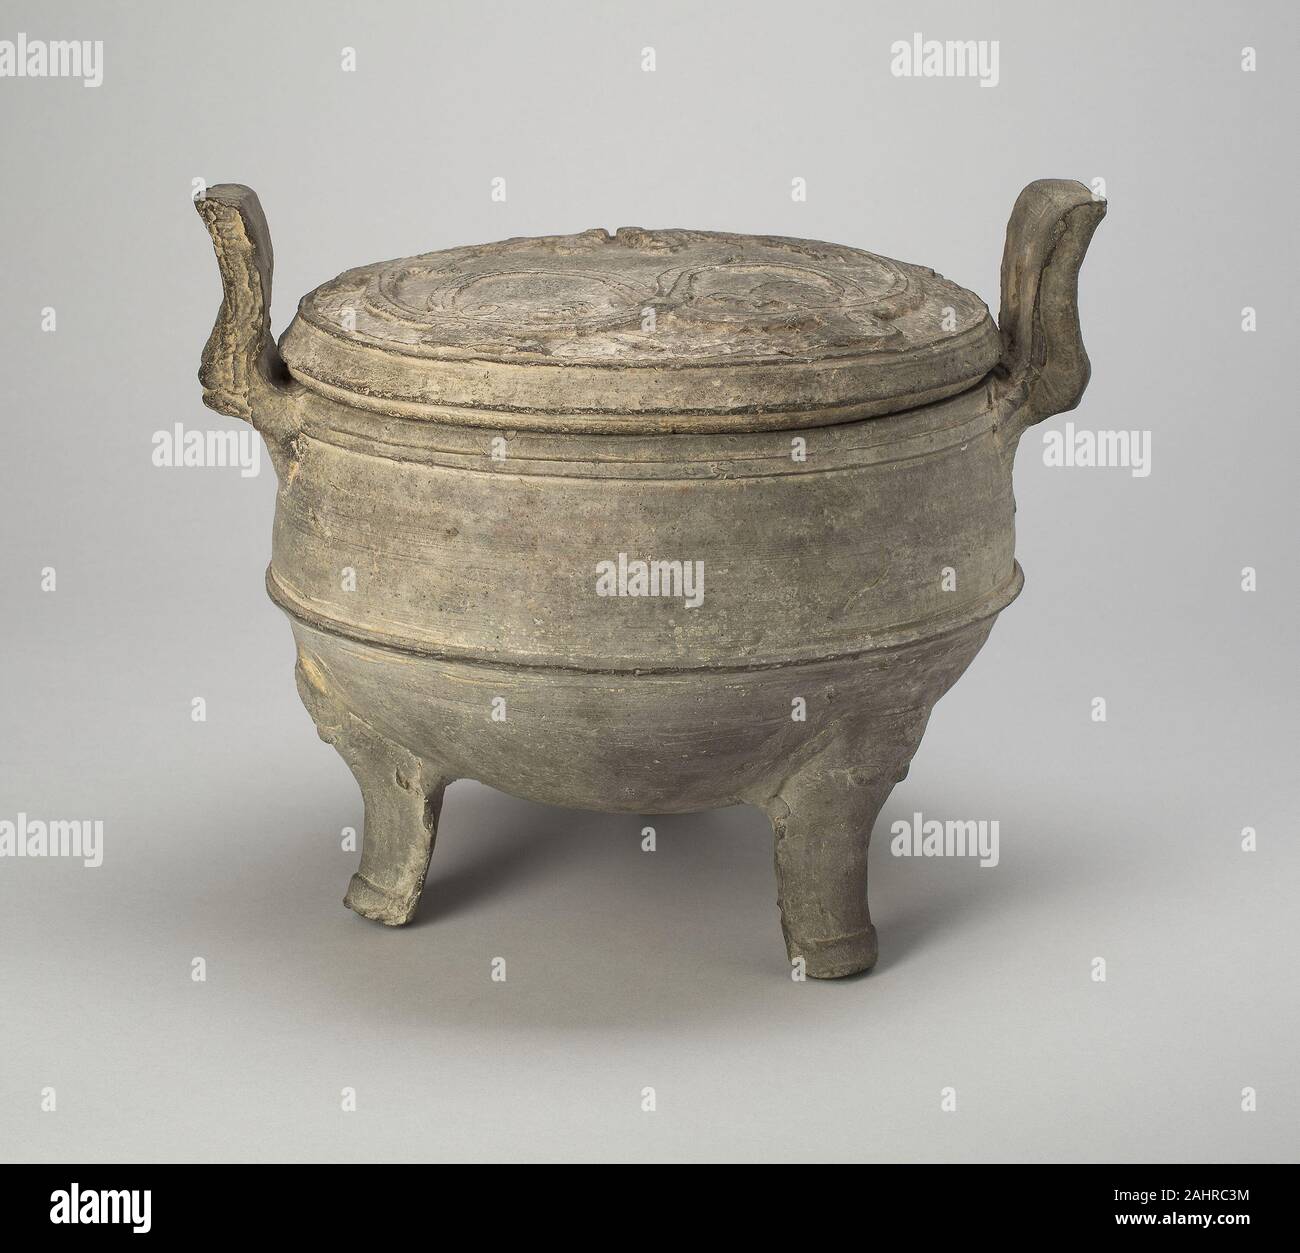 Tripod Caldron (Ding). 206 BC–9 AD. China. Gray earthenware with mold-impressed decoration Under the Han dynasty (206 B.C.-A.D. 220), dynastic stability and affluence broadened the clientele for burial goods from aristocratic families to officials and landowners. Clay replicas of costly vessels of bronze and lacquer met the wider demand for tomb furnishings by middle-income patrons. This caldron, modeled after a common bronze shape, is covered with a lid molded to depict a sinuous dragon—a design executed most naturally in lacquer painting. Stock Photo